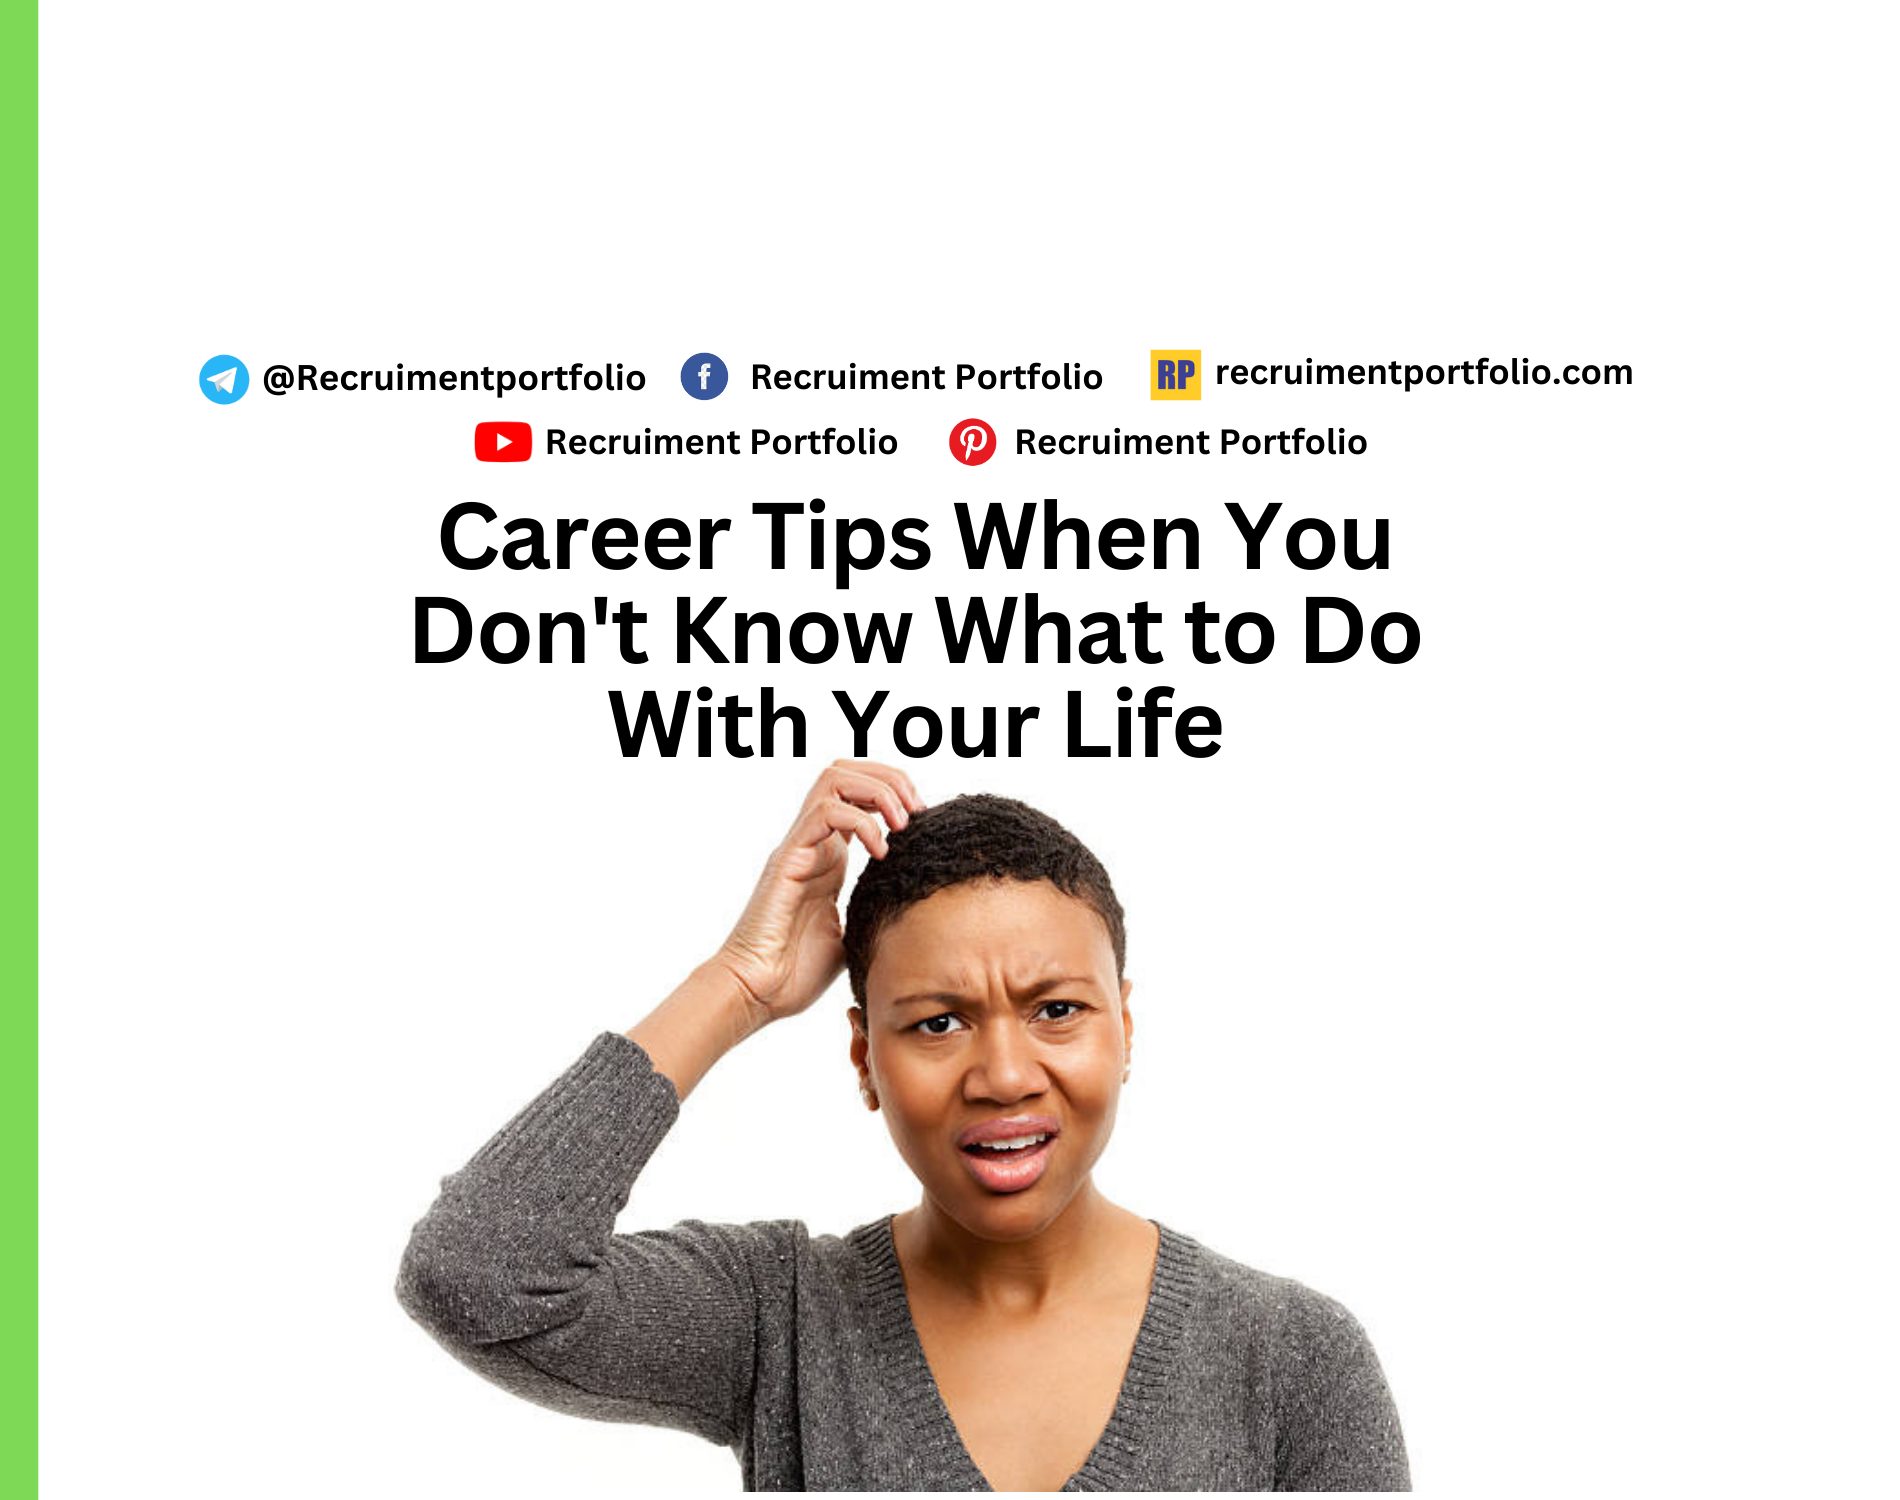 Career Tips When You Don't Know What to Do With Your Life